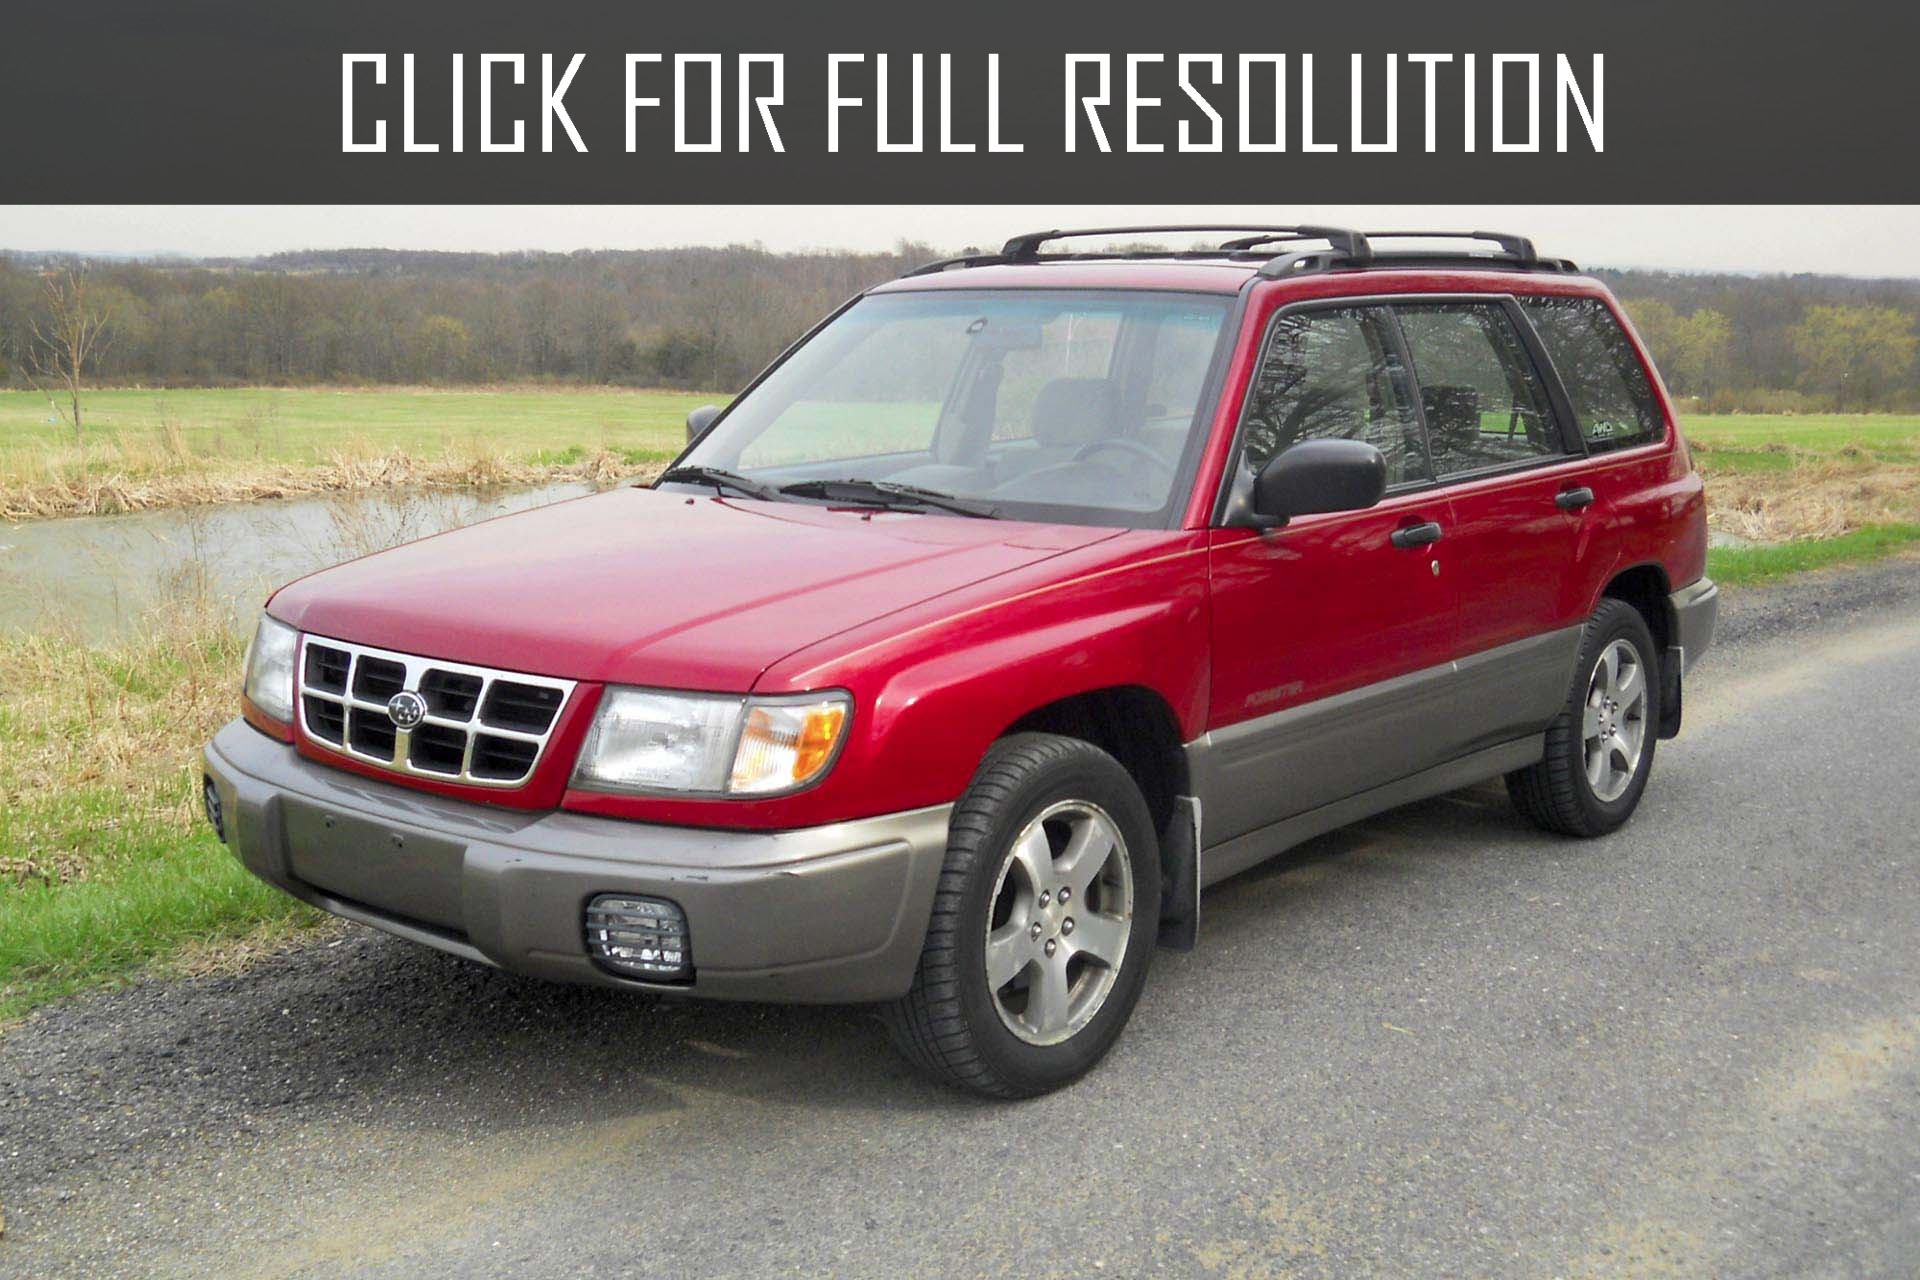 1999 Subaru Forester news, reviews, msrp, ratings with